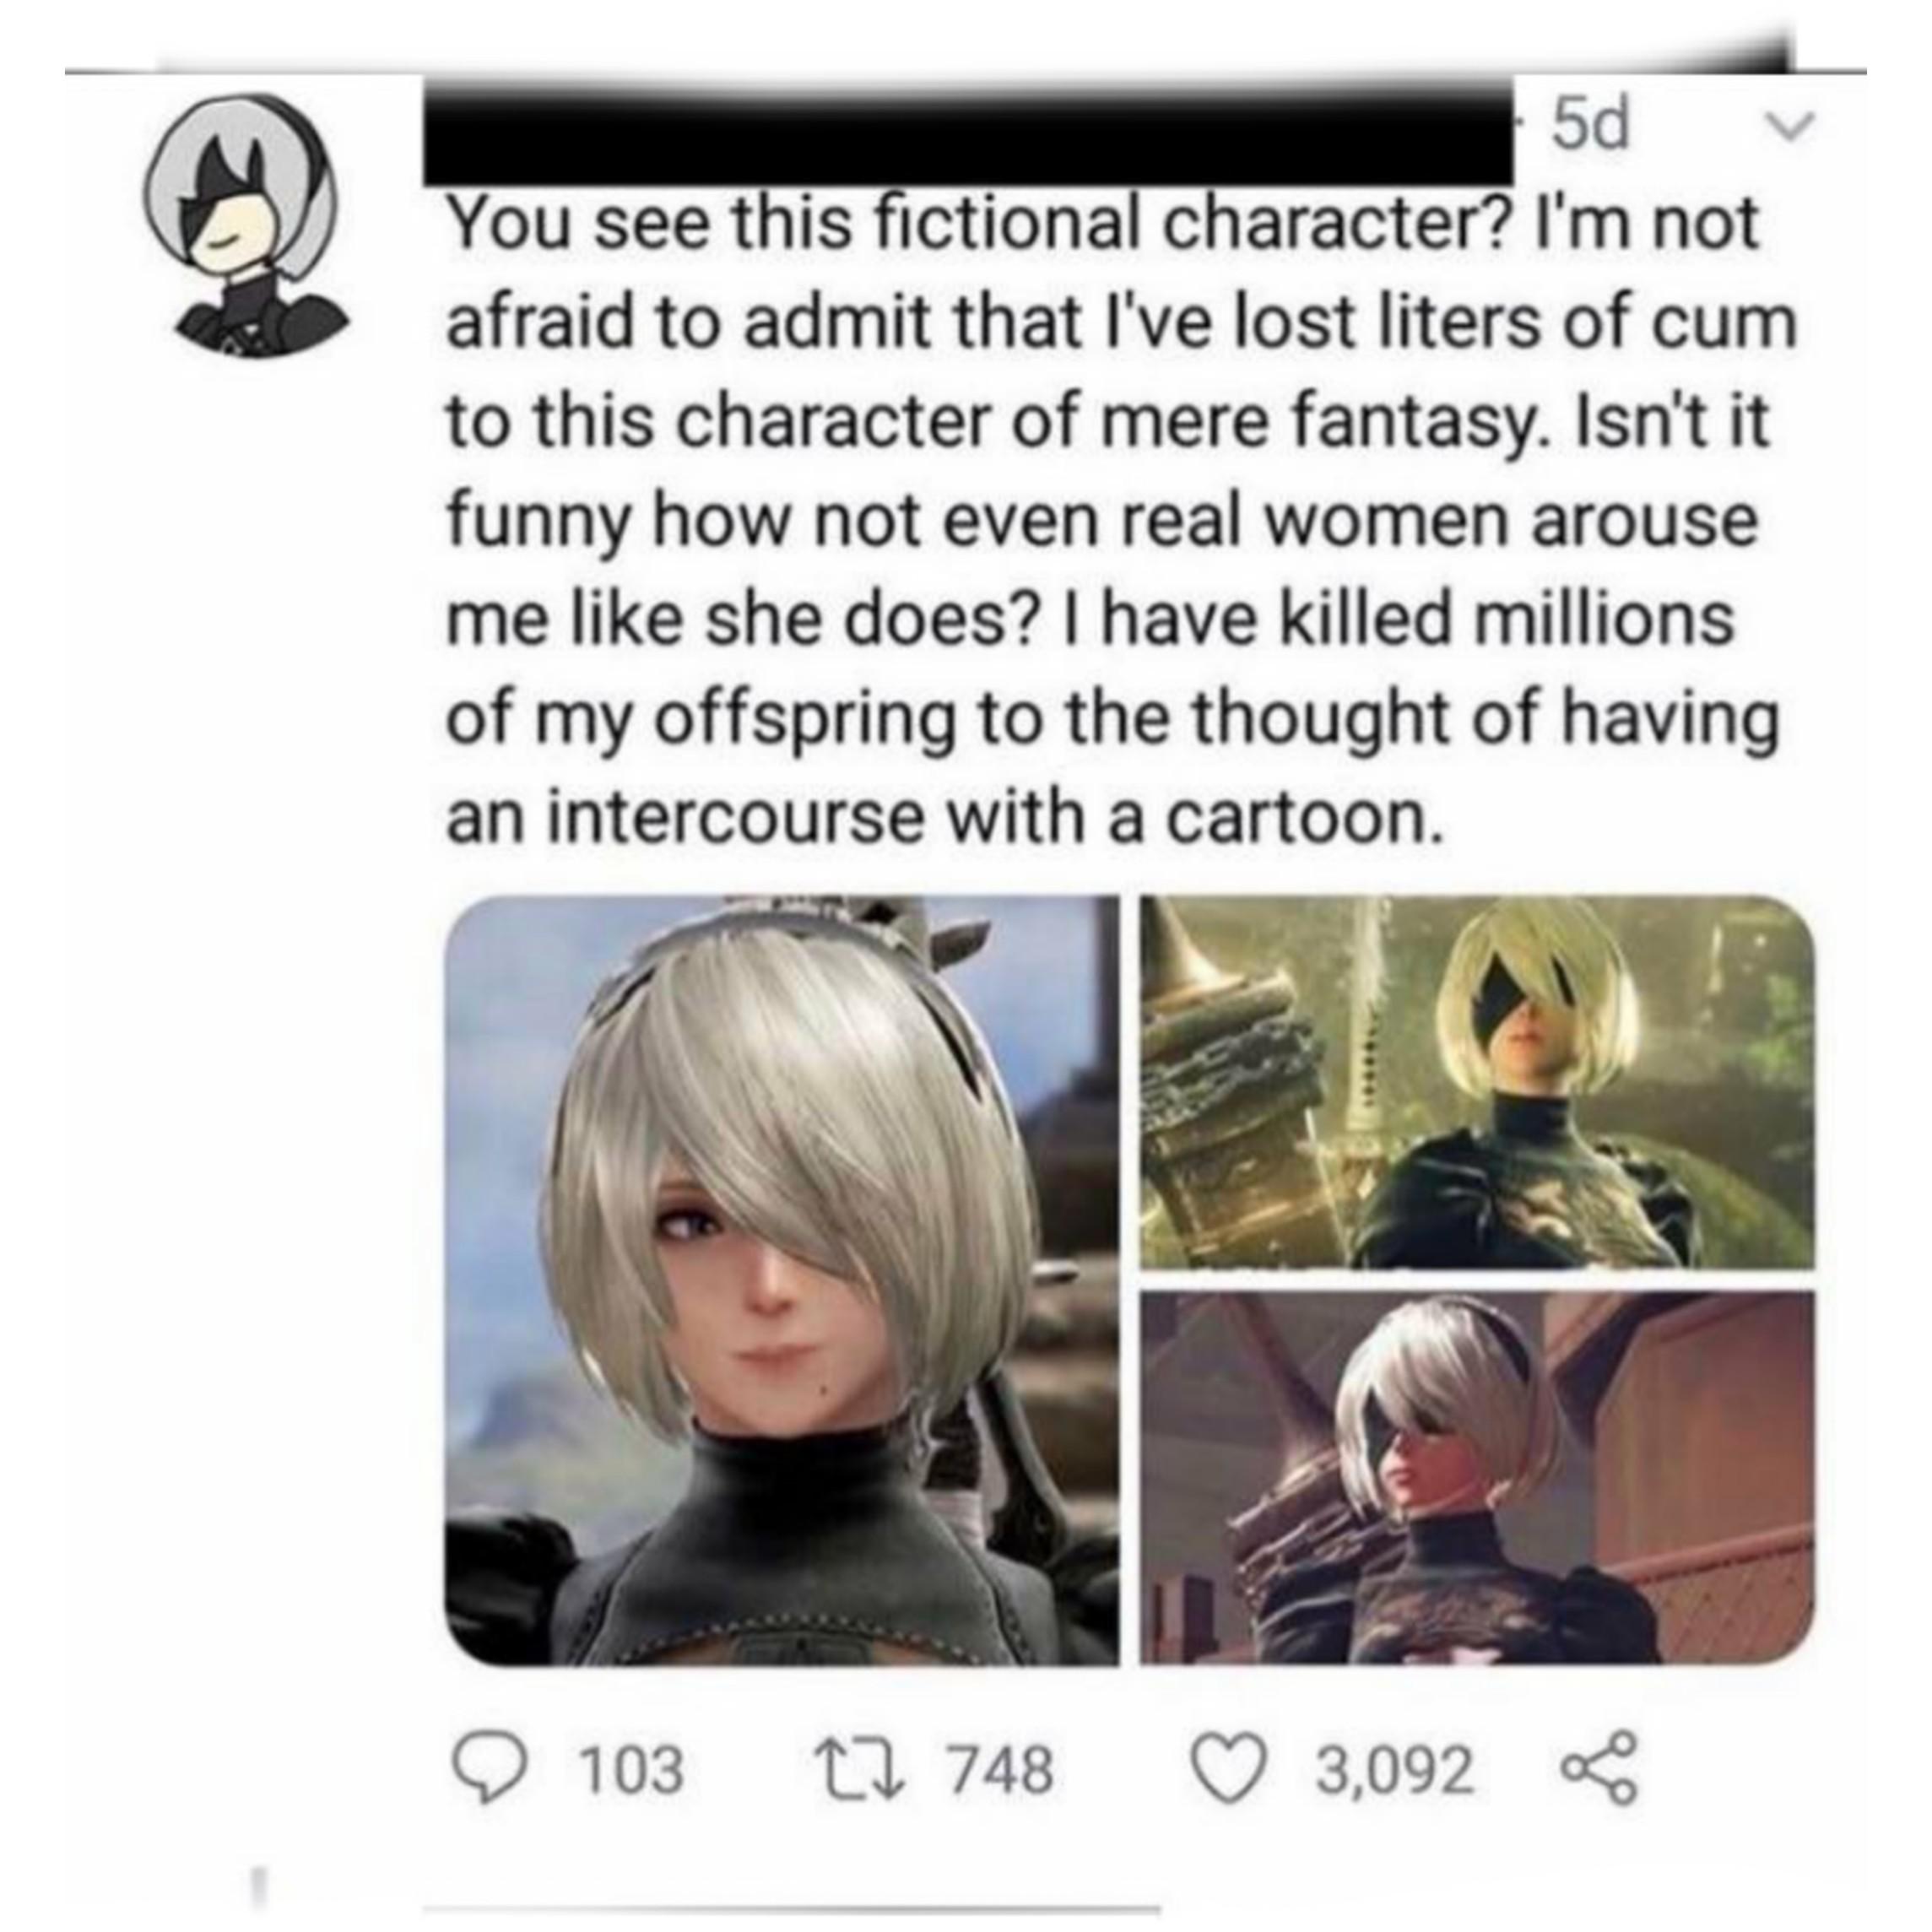 you see this fictional character - 5d v You see this fictional character? I'm not afraid to admit that I've lost liters of cum to this character of mere fantasy. Isn't it funny how not even real women arouse me she does? I have killed millions of my offsp